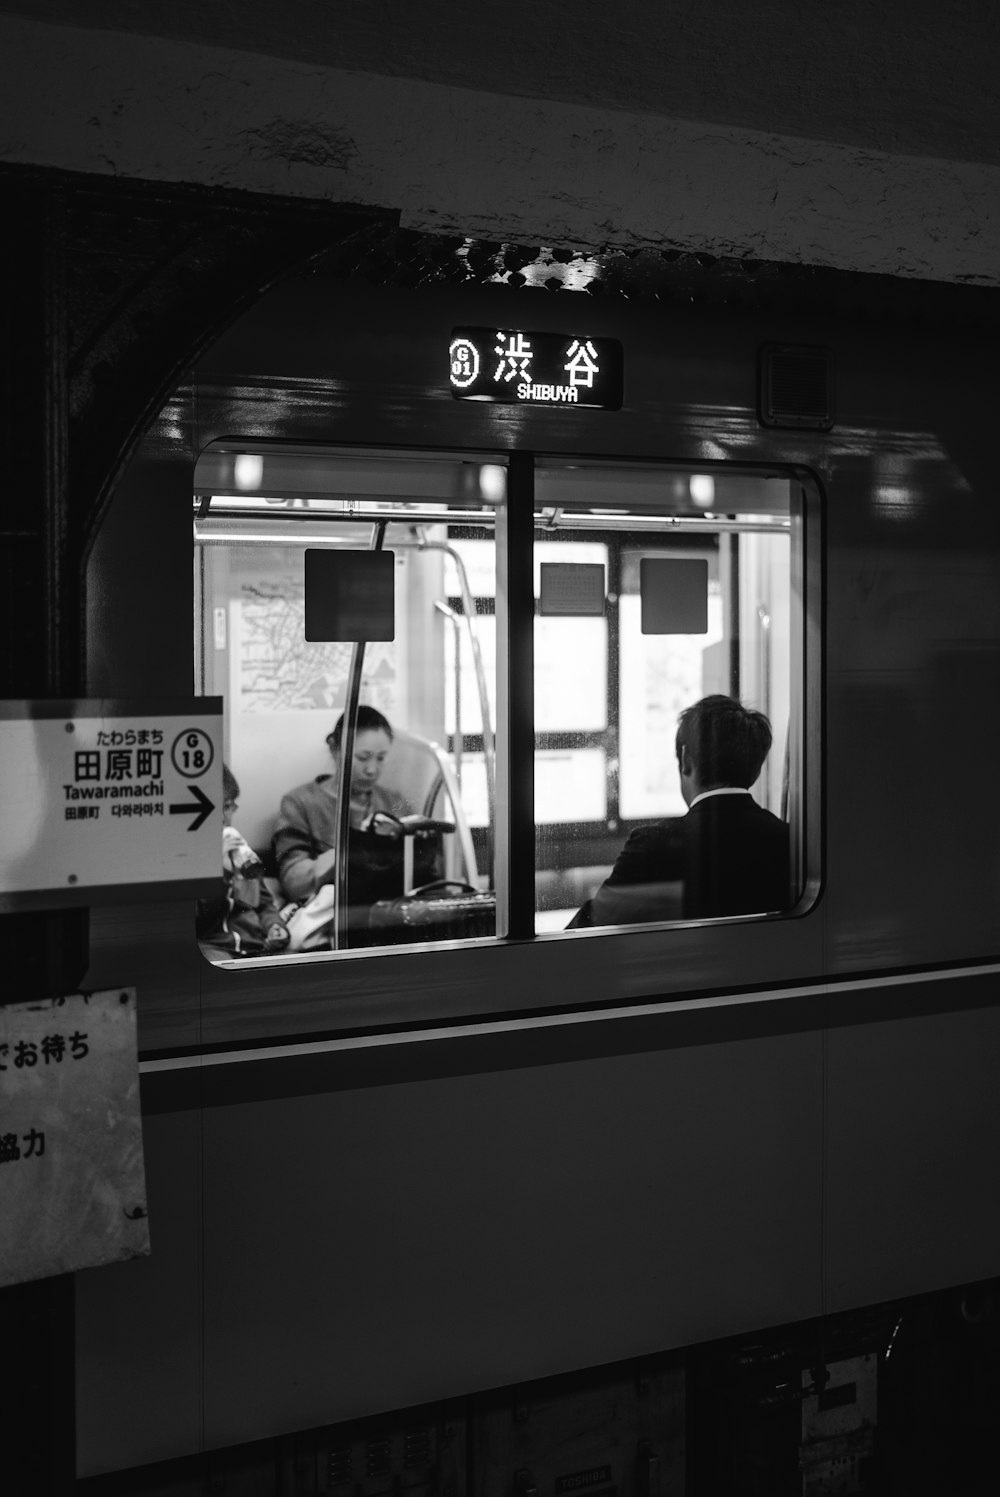 grayscale photo of two people sitting in train